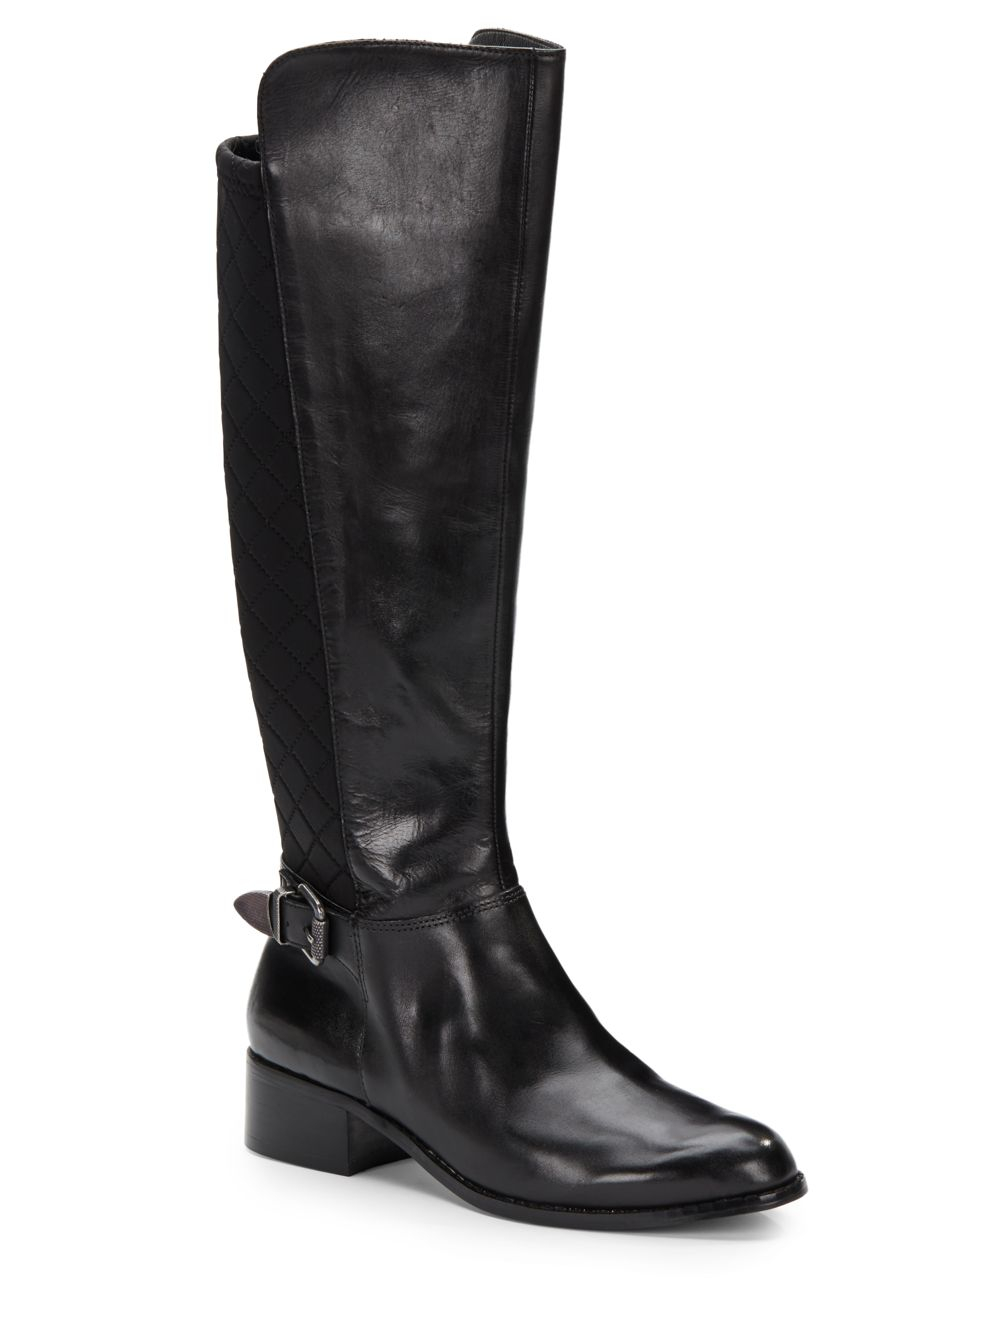 Lyst - Charles by charles david Julia Quilted Panel Leather Tall Boots ...